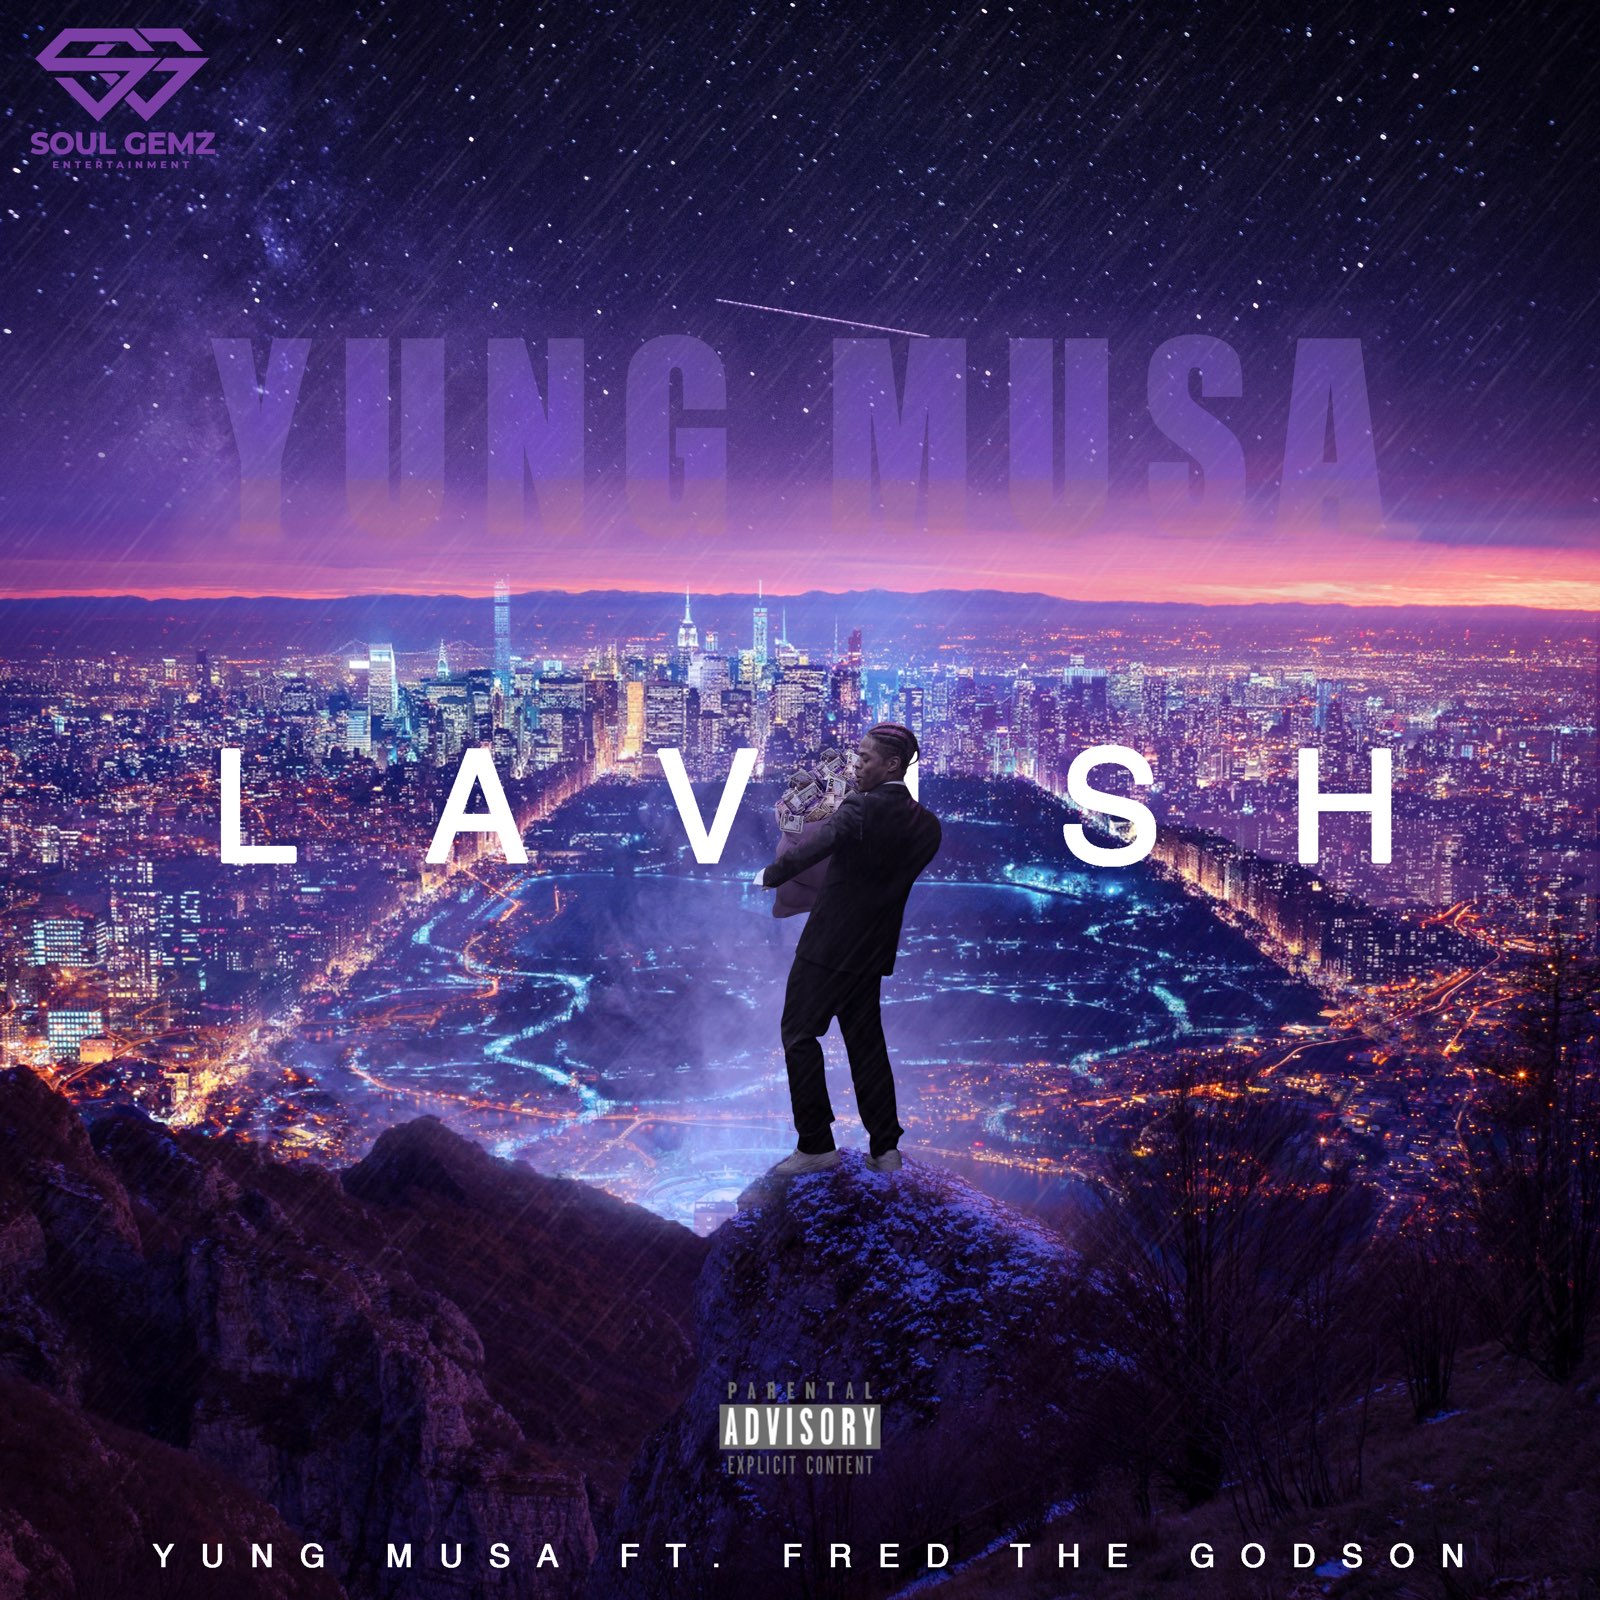 Yung Musa and Fred The Godson perform “Lavish” at Club Reverb